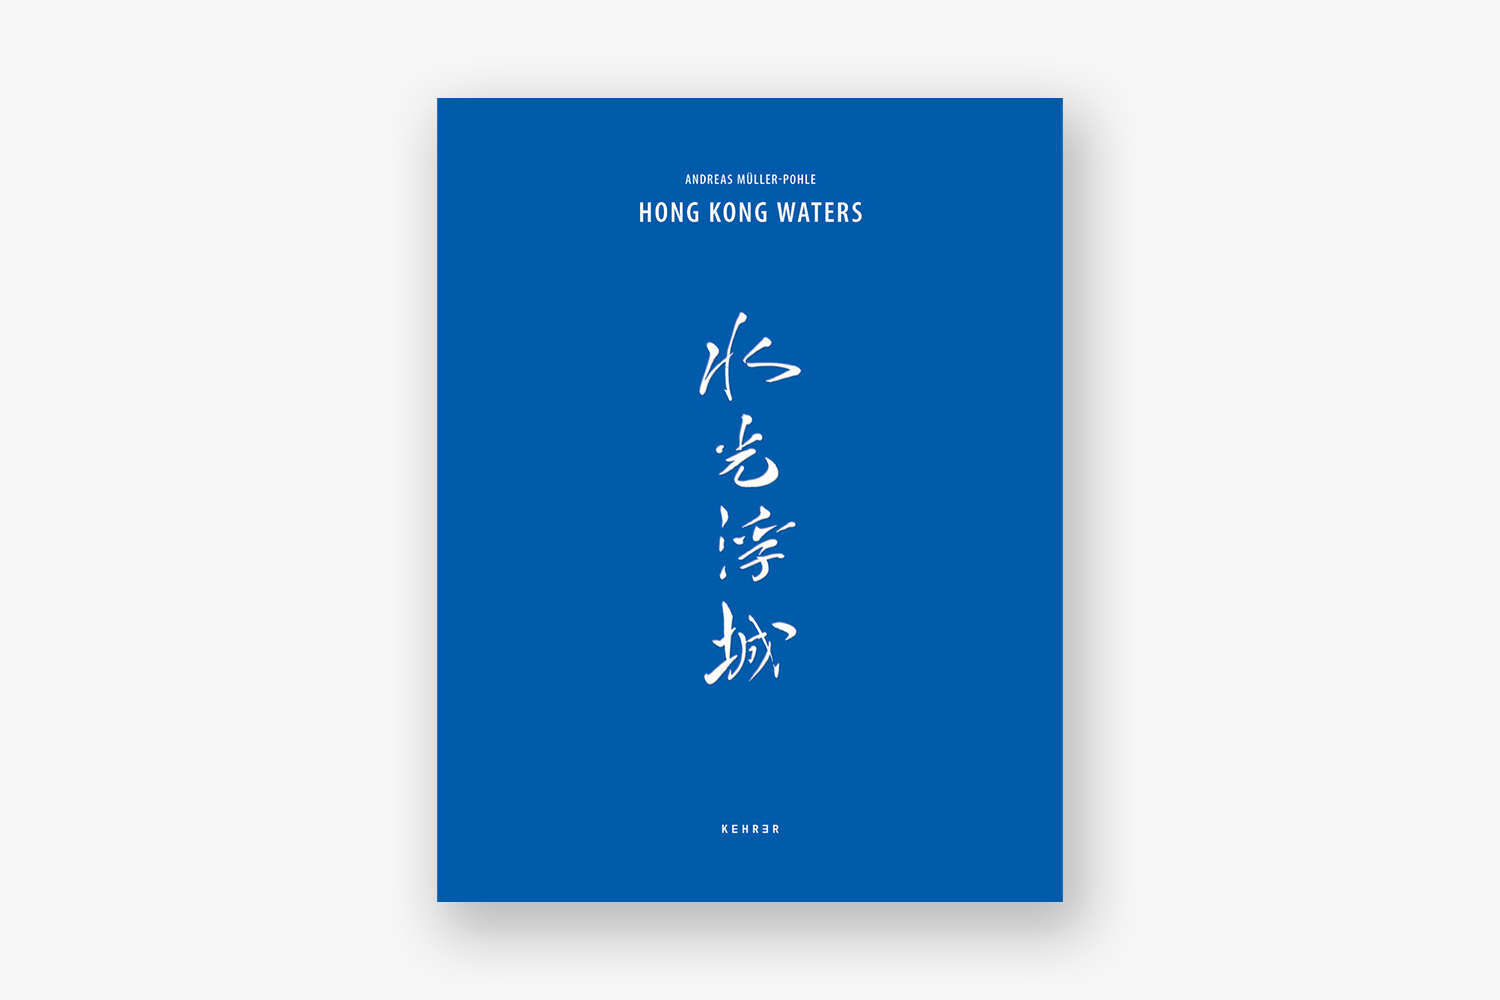 hong kong waters cover - Andreas Müller-Pohle: Hong Kong Waters BOOK |  - Andreas Müller-Pohle: Hong Kong Waters